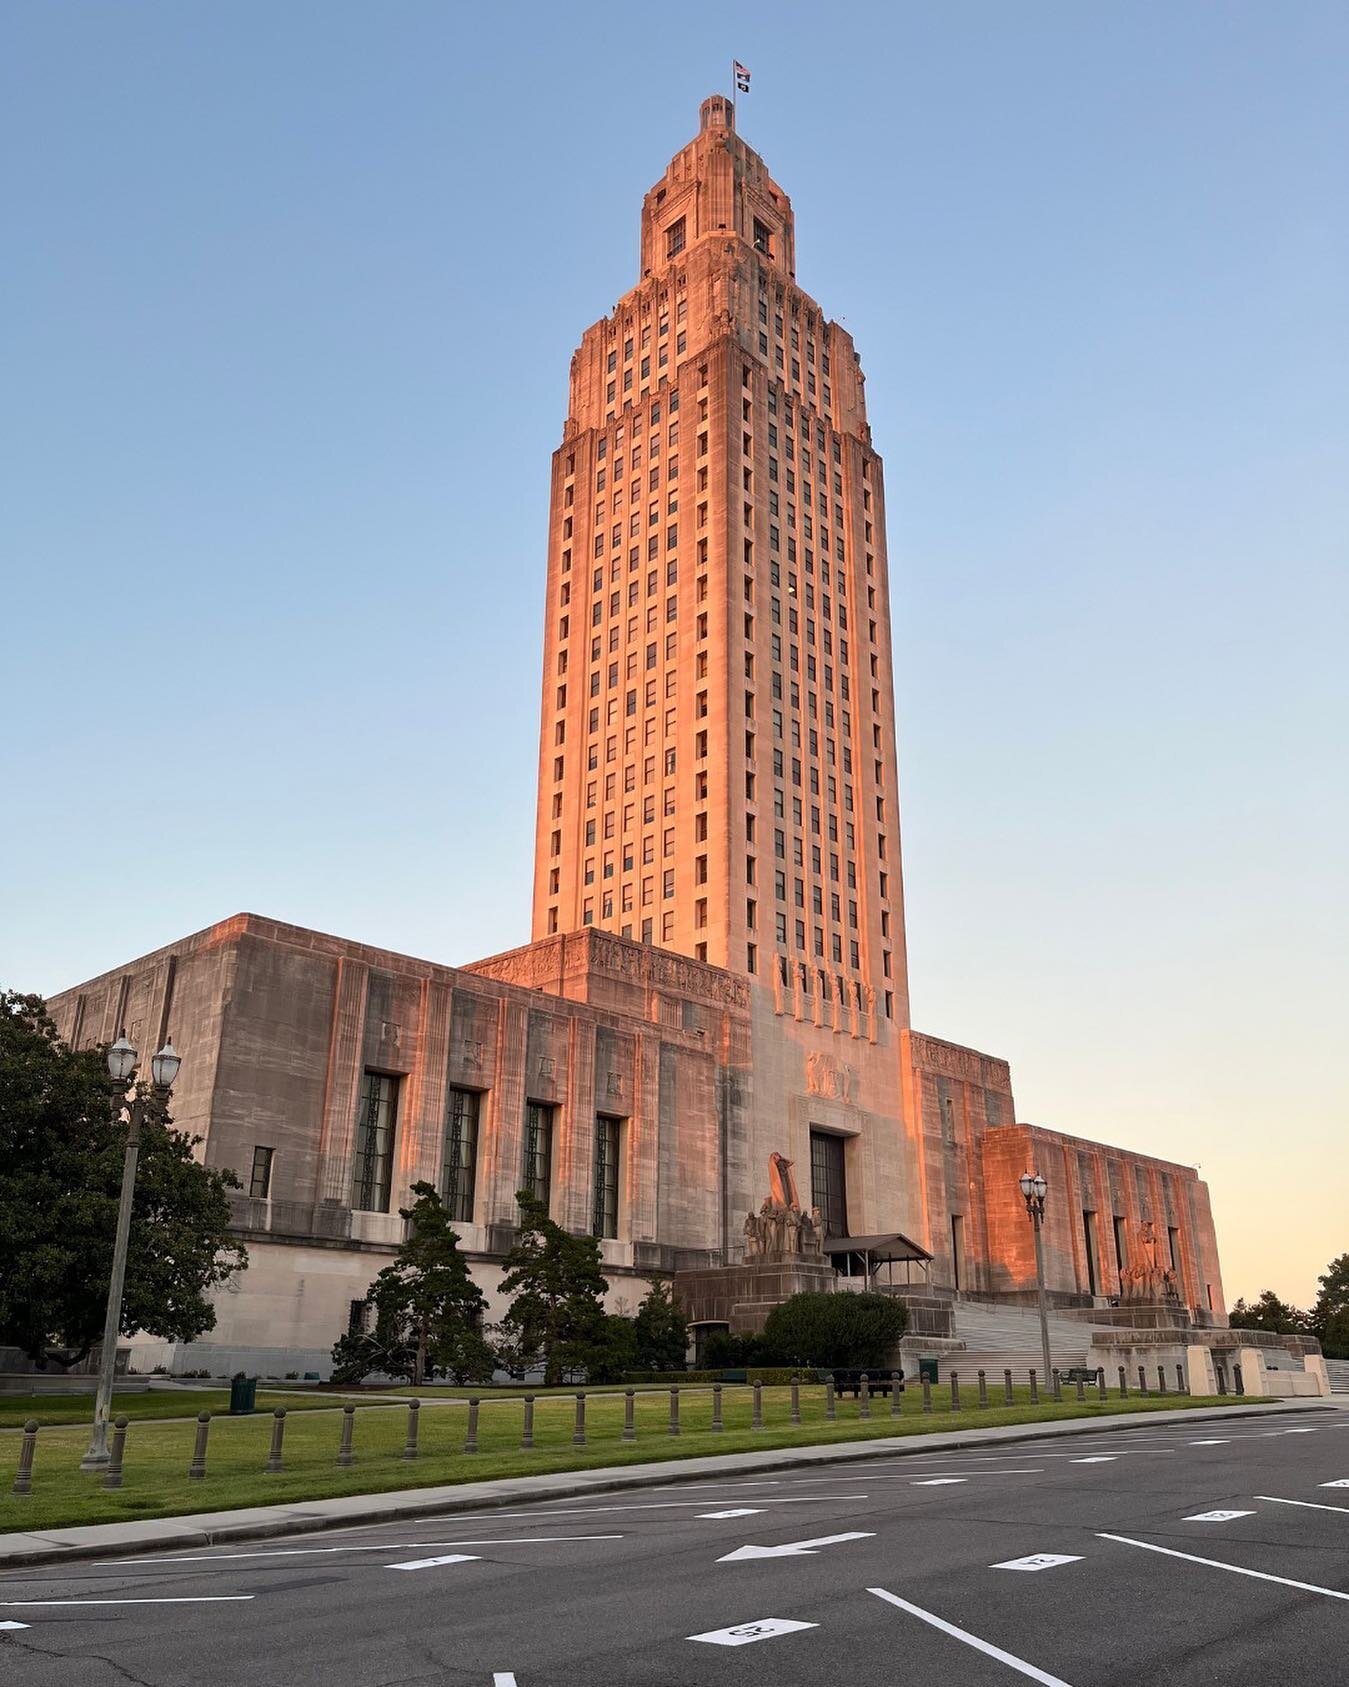 ☀️Hello from the lovely Louisiana! Our designer Chris Boone captured this elegant sunset at the state&rsquo;s capitol while onsite at Louisiana Public Broadcasting. We&rsquo;re here this week working on design elements for a new @lpb_org studio. Stay